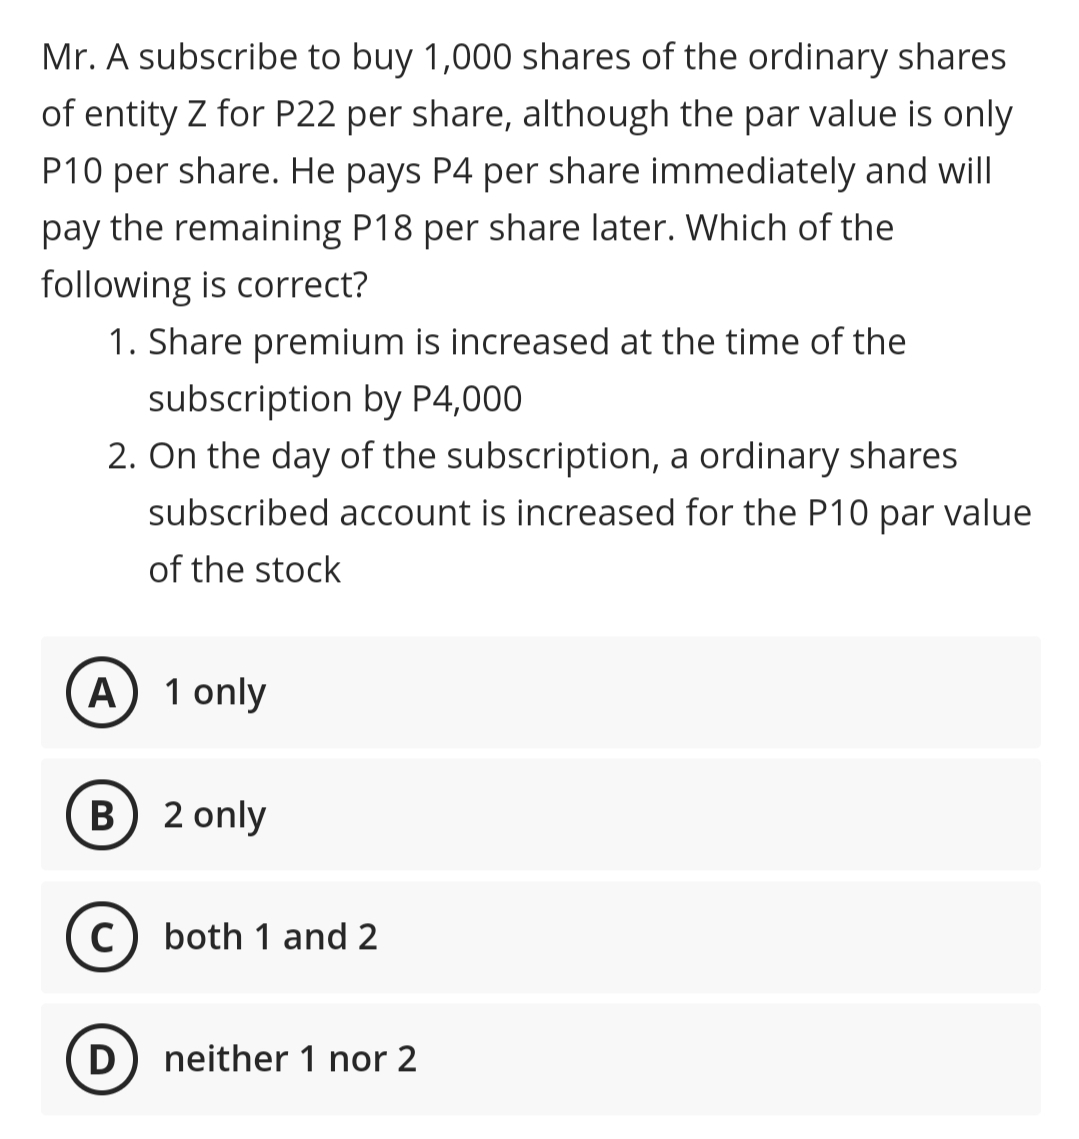 Mr. A subscribe to buy 1,000 shares of the ordinary shares
of entity Z for P22 per share, although the par value is only
P10 per share. He pays P4 per share immediately and will
pay the remaining P18 per share later. Which of the
following is correct?
1. Share premium is increased at the time of the
subscription by P4,000
2. On the day of the subscription, a ordinary shares
subscribed account is increased for the P10 par value
of the stock
A) 1 only
B) 2 only
C) both 1 and 2
D) neither 1 nor 2
